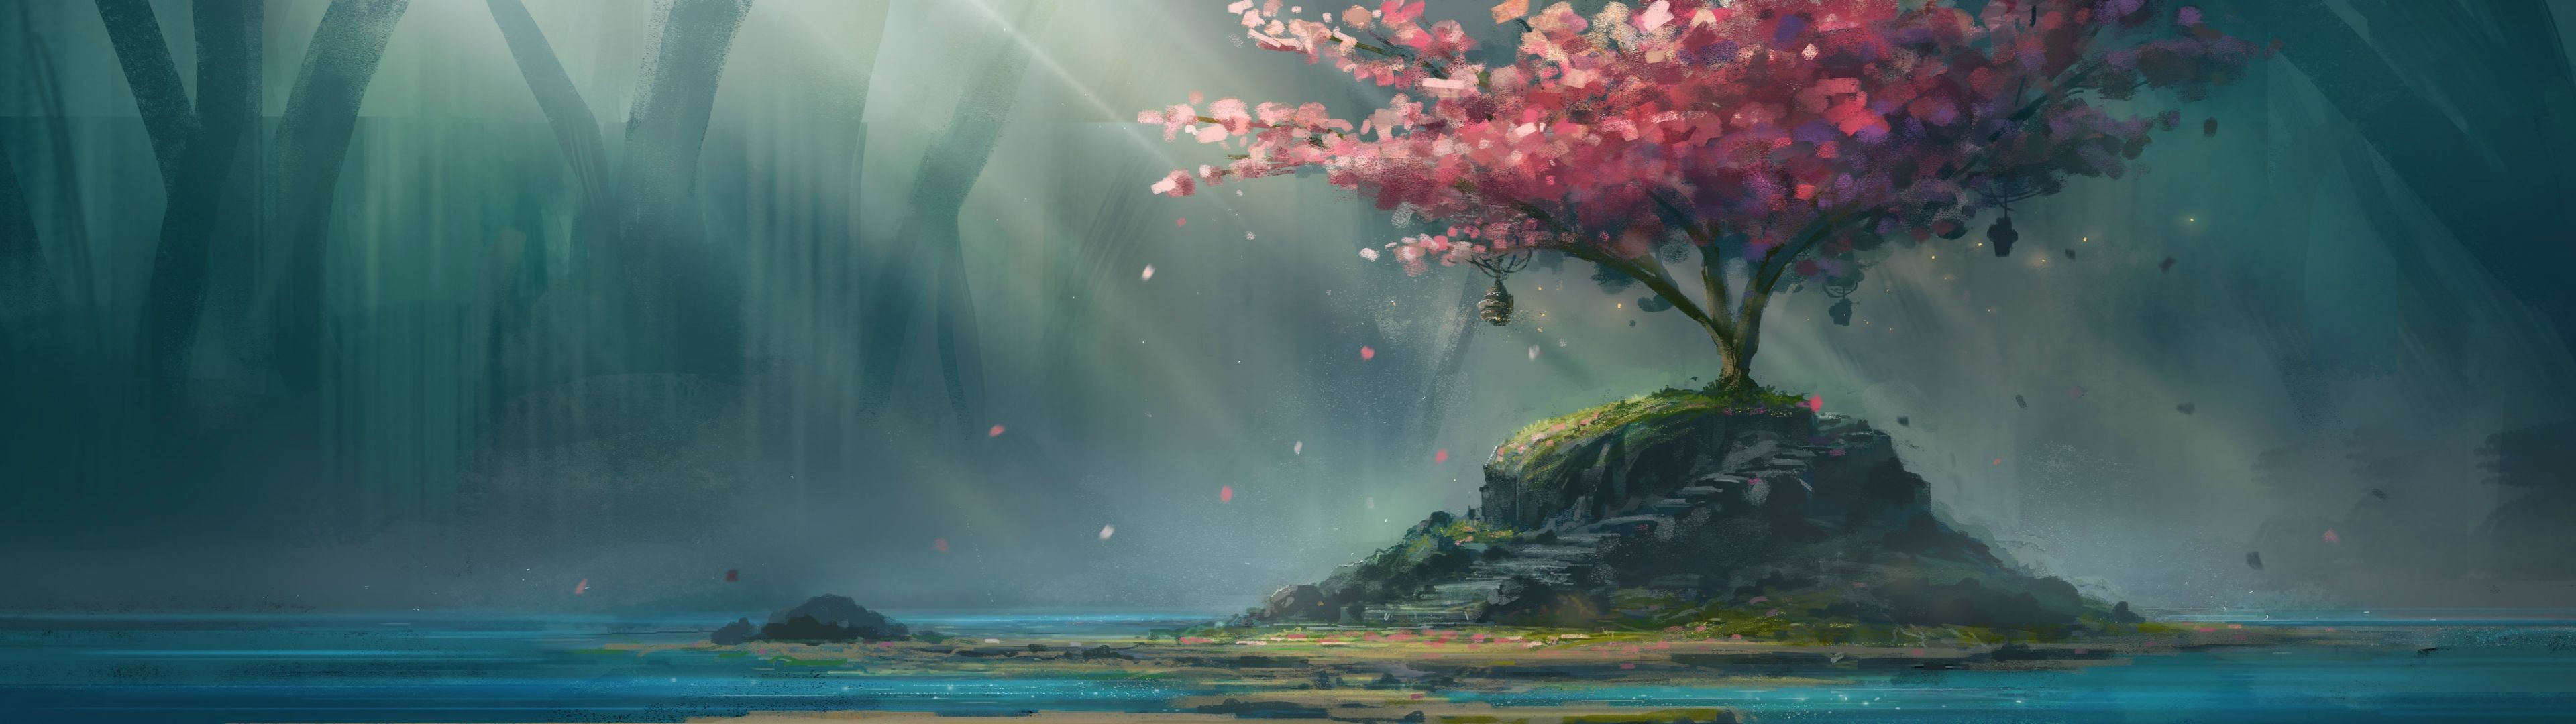 General 3840x1080 cherry blossom water stairs